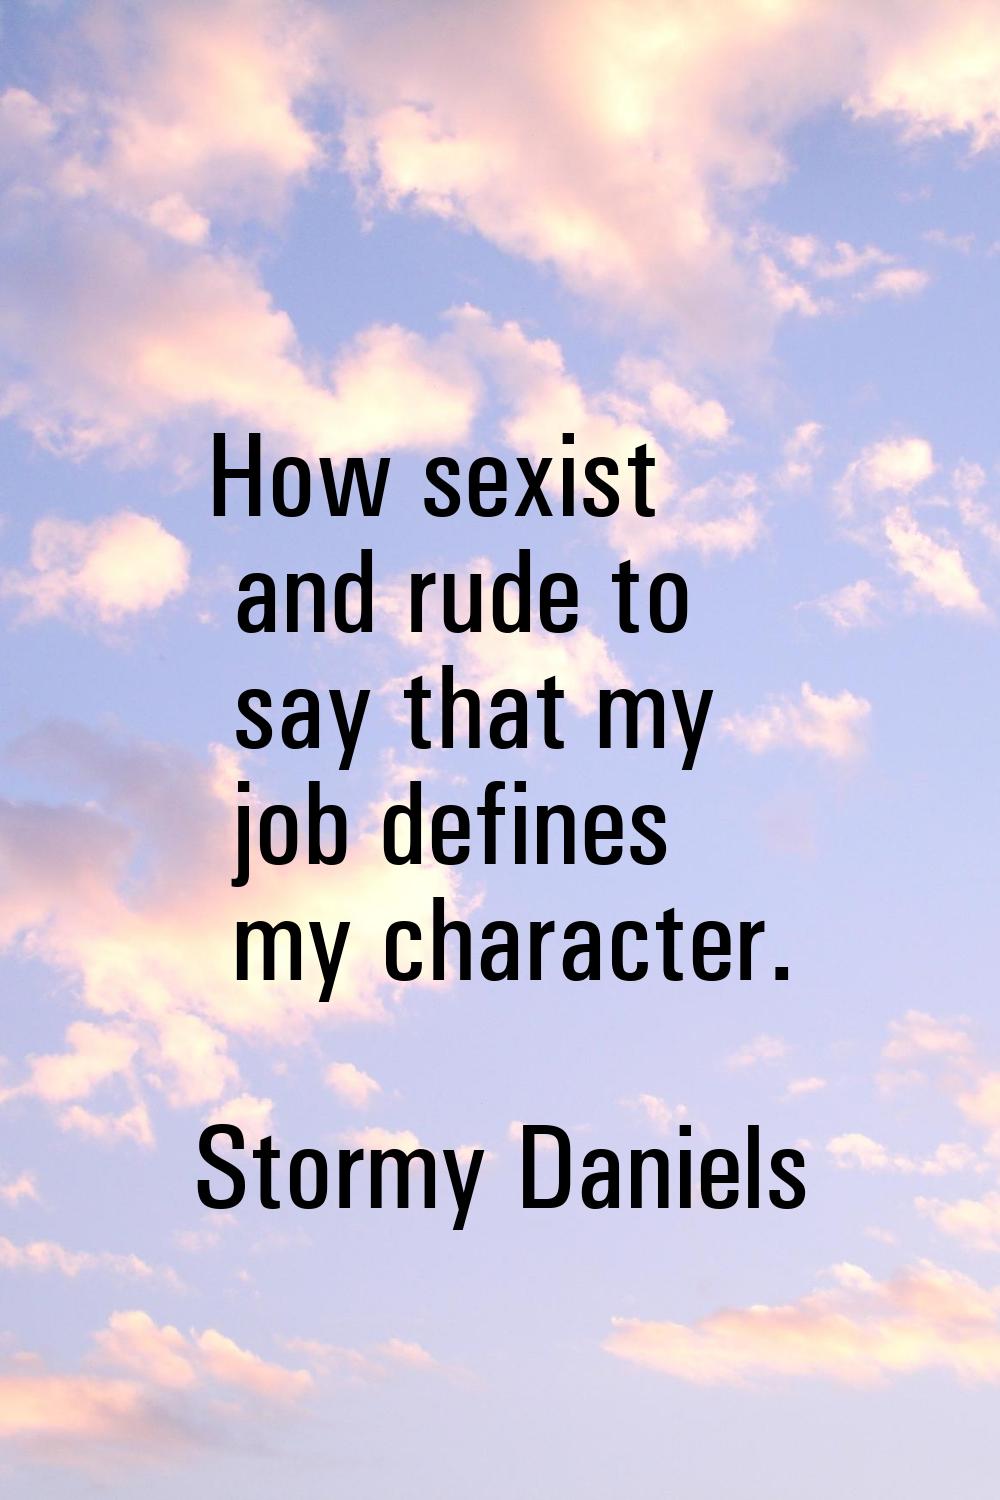 How sexist and rude to say that my job defines my character.